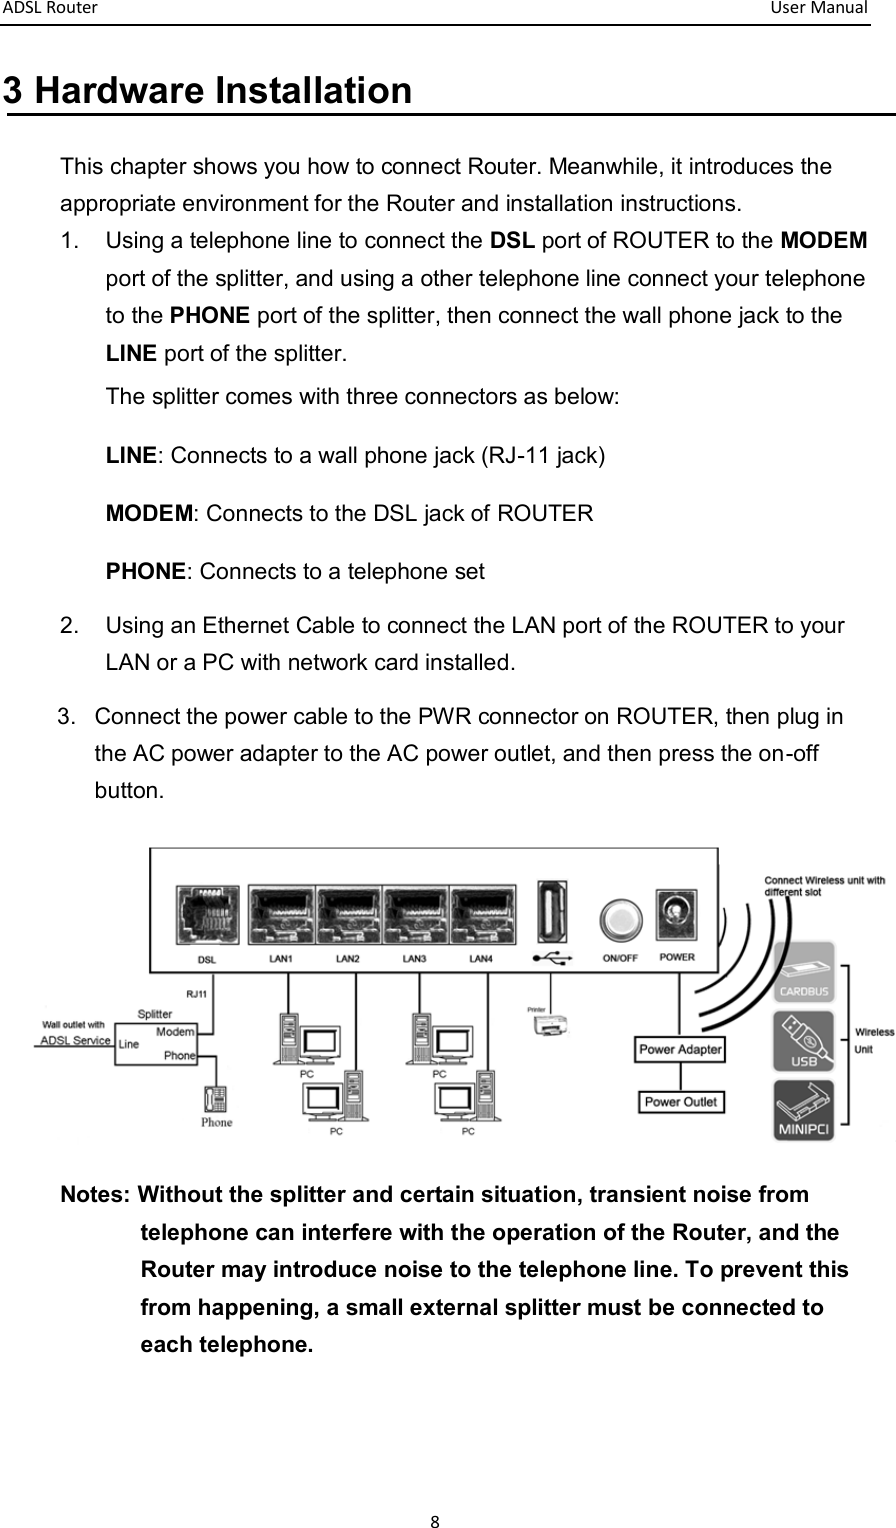 ADSL Router       User Manual 8 3 Hardware Installation This chapter shows you how to connect Router. Meanwhile, it introduces the appropriate environment for the Router and installation instructions.   1.  Using a telephone line to connect the DSL port of ROUTER to the MODEM port of the splitter, and using a other telephone line connect your telephone to the PHONE port of the splitter, then connect the wall phone jack to the LINE port of the splitter. The splitter comes with three connectors as below: LINE: Connects to a wall phone jack (RJ-11 jack) MODEM: Connects to the DSL jack of ROUTER PHONE: Connects to a telephone set 2.  Using an Ethernet Cable to connect the LAN port of the ROUTER to your LAN or a PC with network card installed. 3.  Connect the power cable to the PWR connector on ROUTER, then plug in the AC power adapter to the AC power outlet, and then press the on-off button.    Notes: Without the splitter and certain situation, transient noise from telephone can interfere with the operation of the Router, and the Router may introduce noise to the telephone line. To prevent this from happening, a small external splitter must be connected to each telephone. 